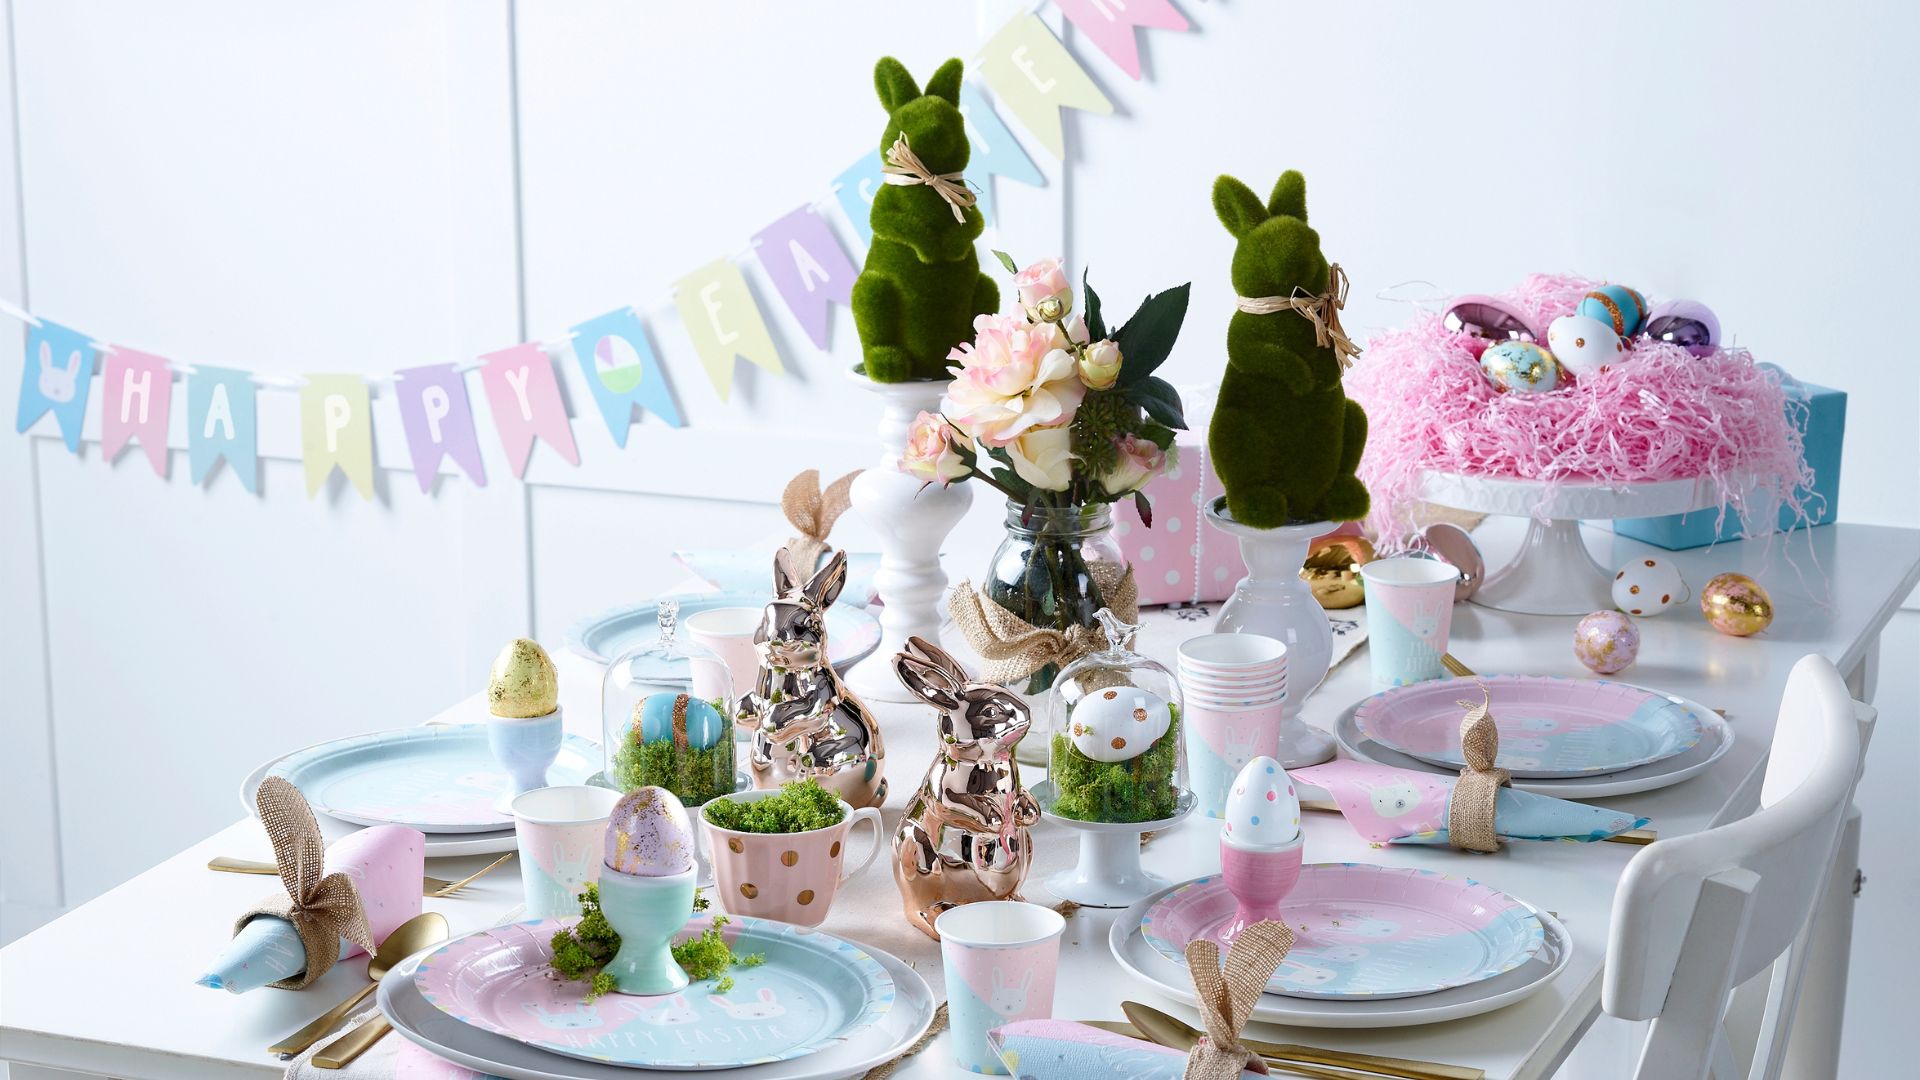 Have A Hoppy Easter With These Easter Table Setting Ideas & Easter Decorations